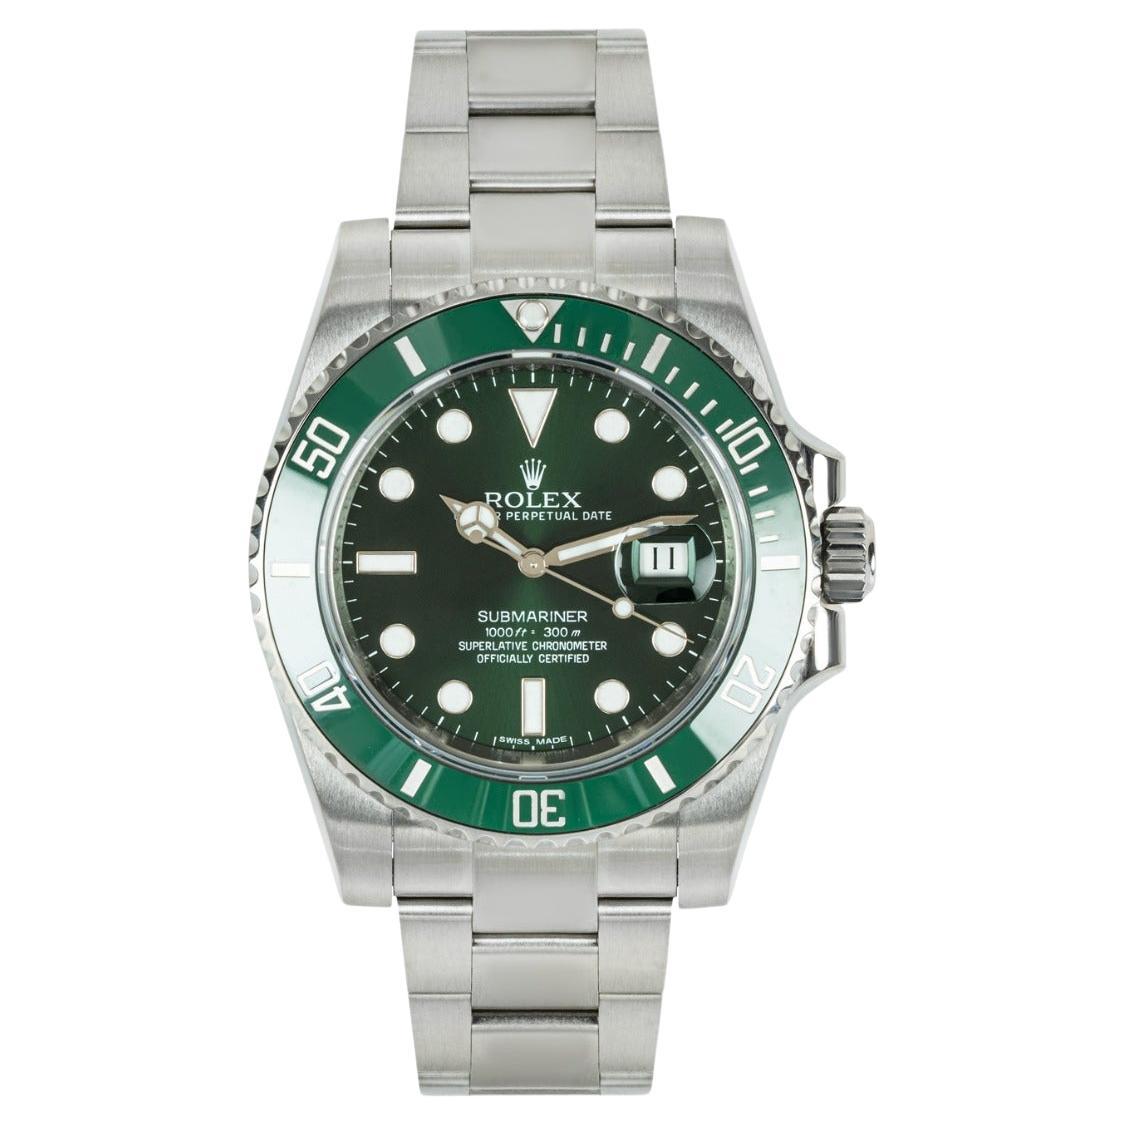 Do all Rolex watches say “Swiss-Made”?